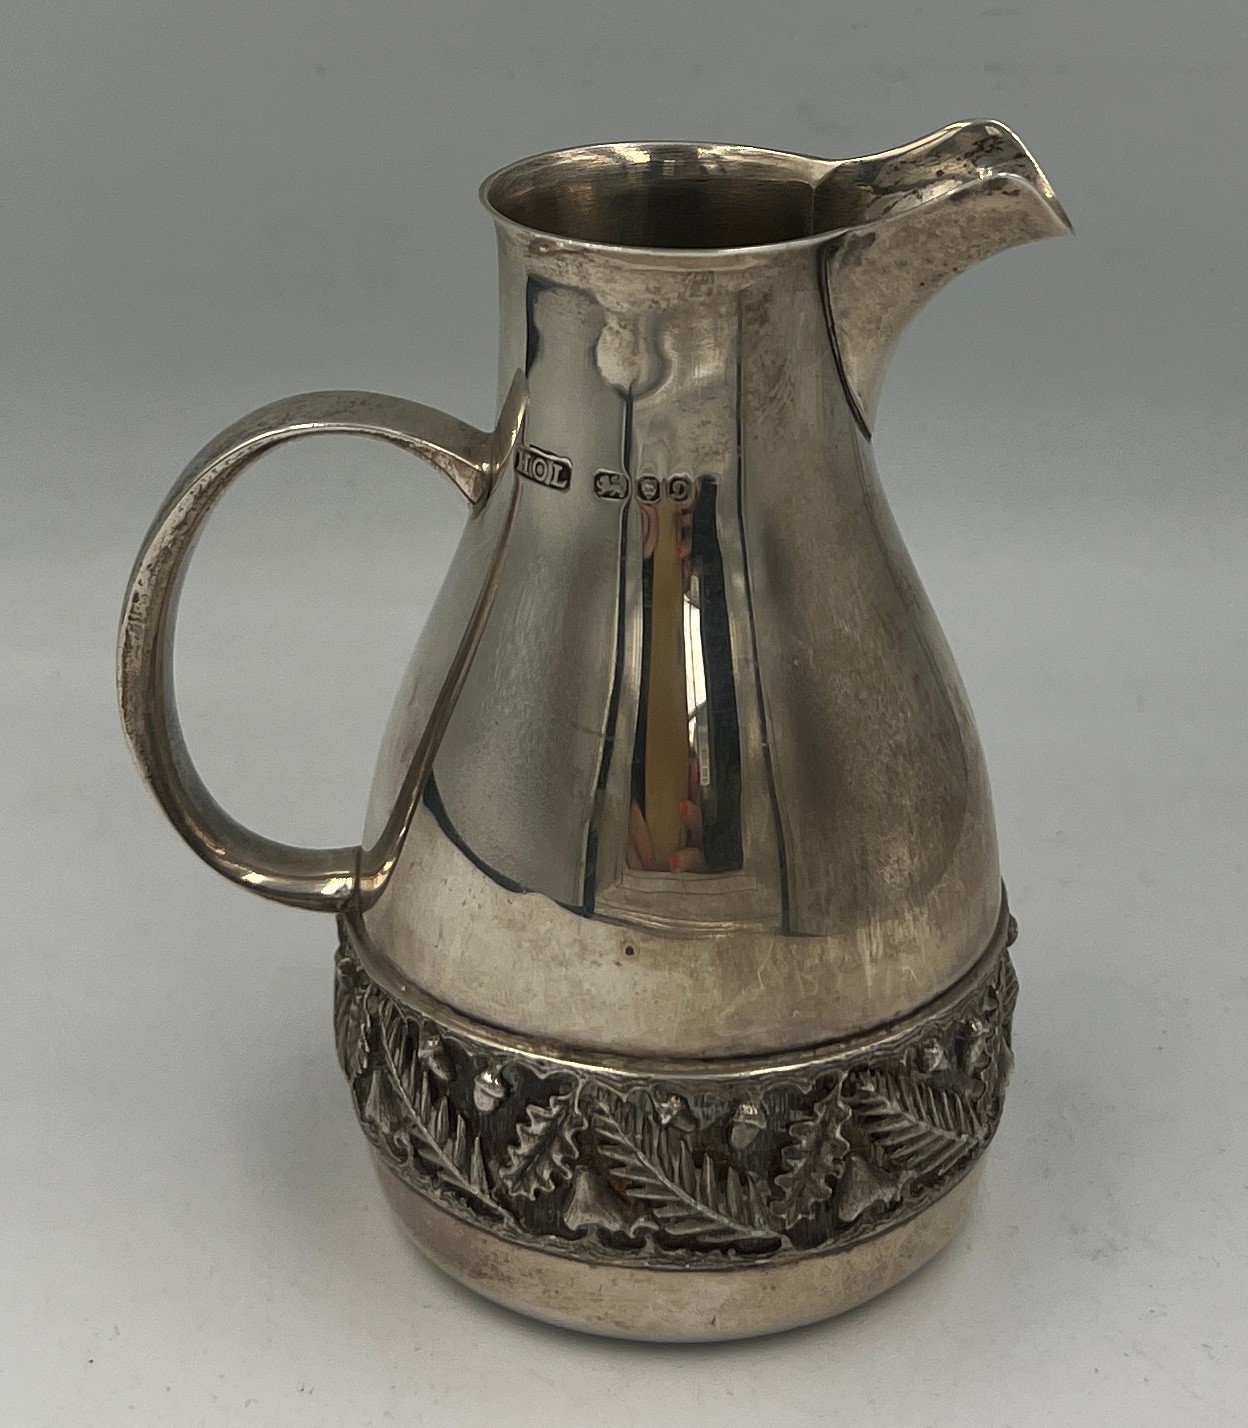 A hallmarked silver jug with acorn and leaf decorative band to base. London 1978, maker House of